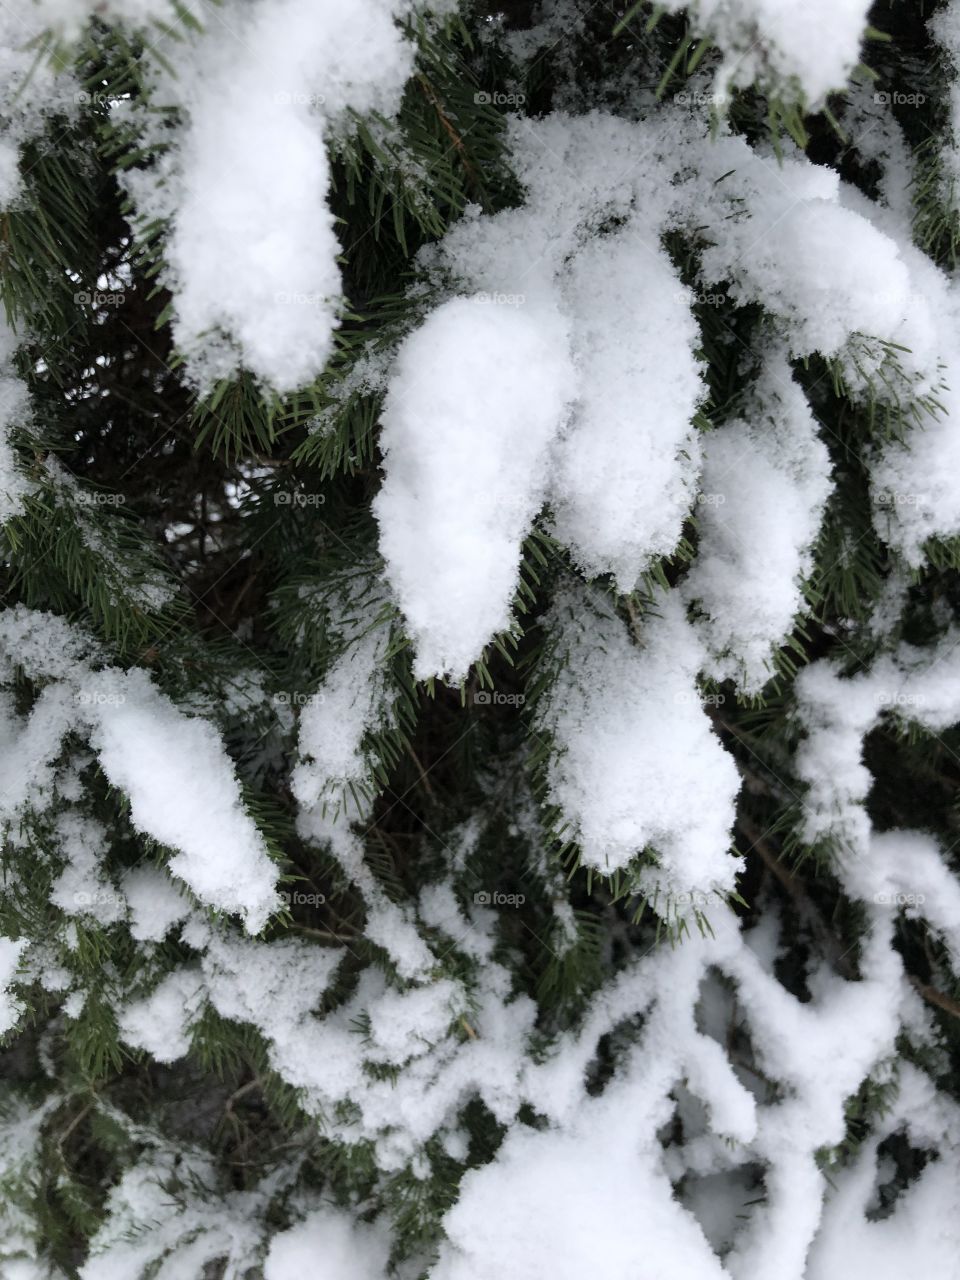 First snow of December on a spruce tree branch 